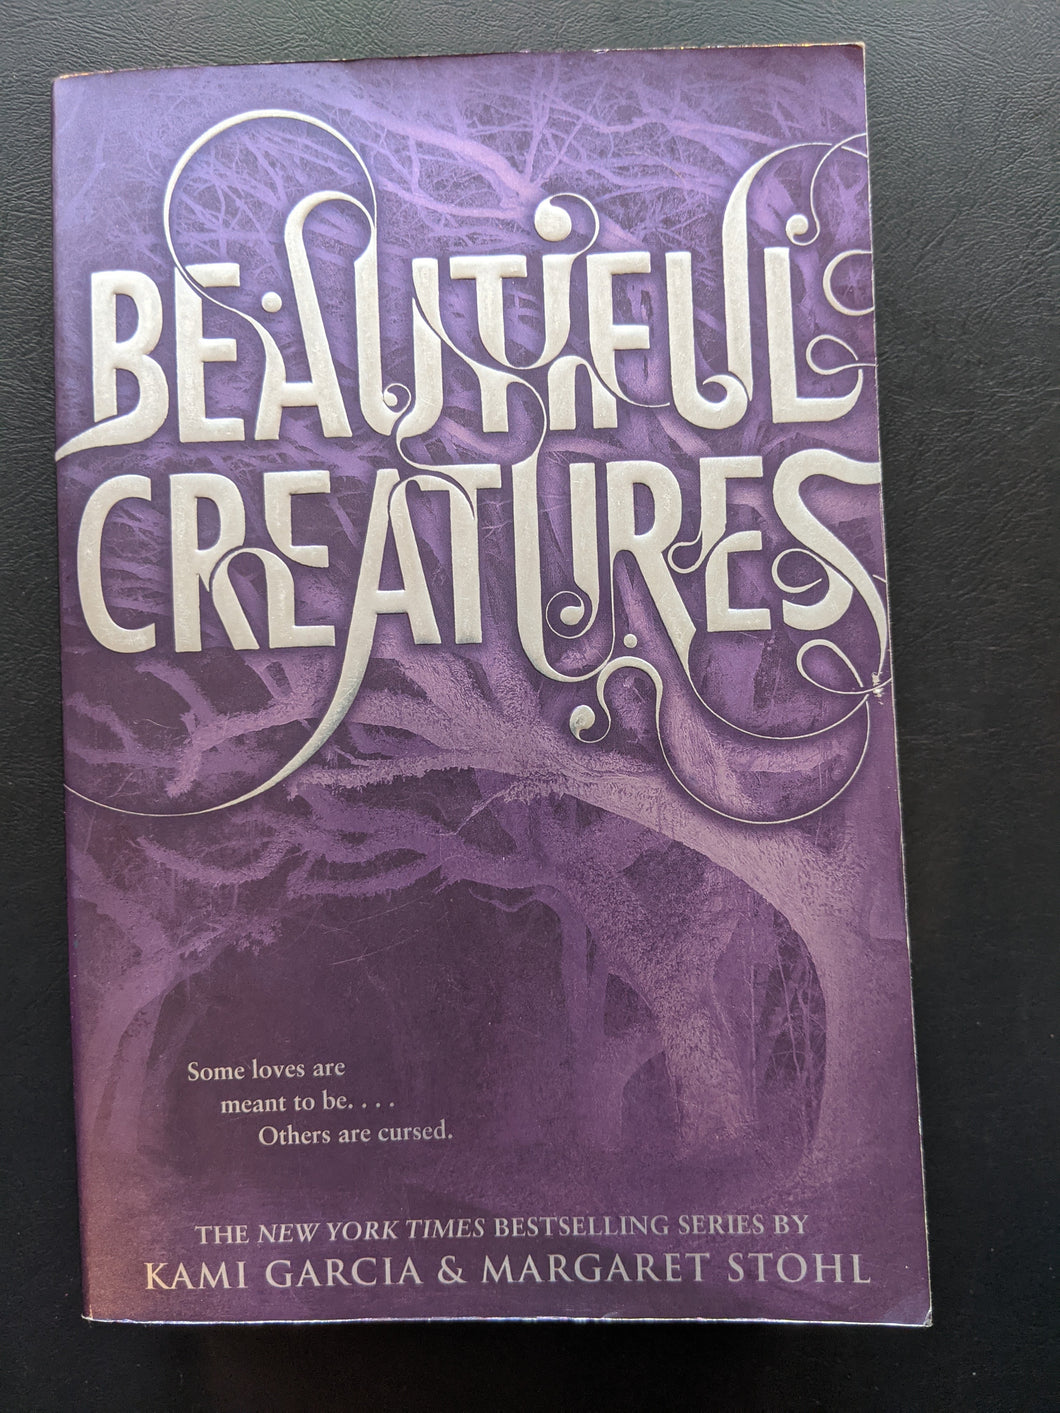 Beautiful Creatures (Book #1) by Kami Garcia and Margaret Stohl